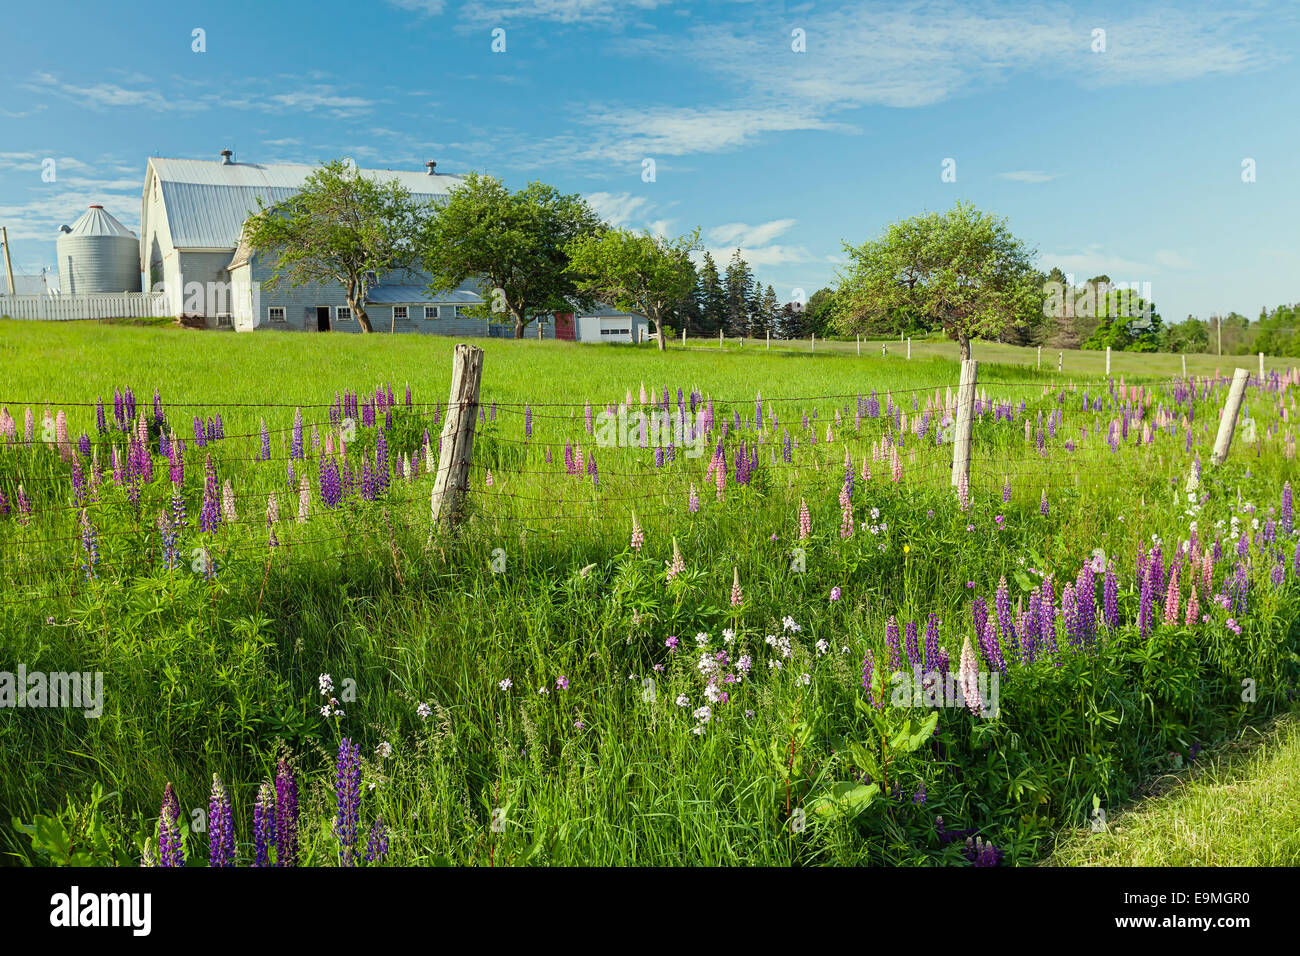 Dairy farm and wild flowers in rural Prince Edward Island, Canada. Stock Photo